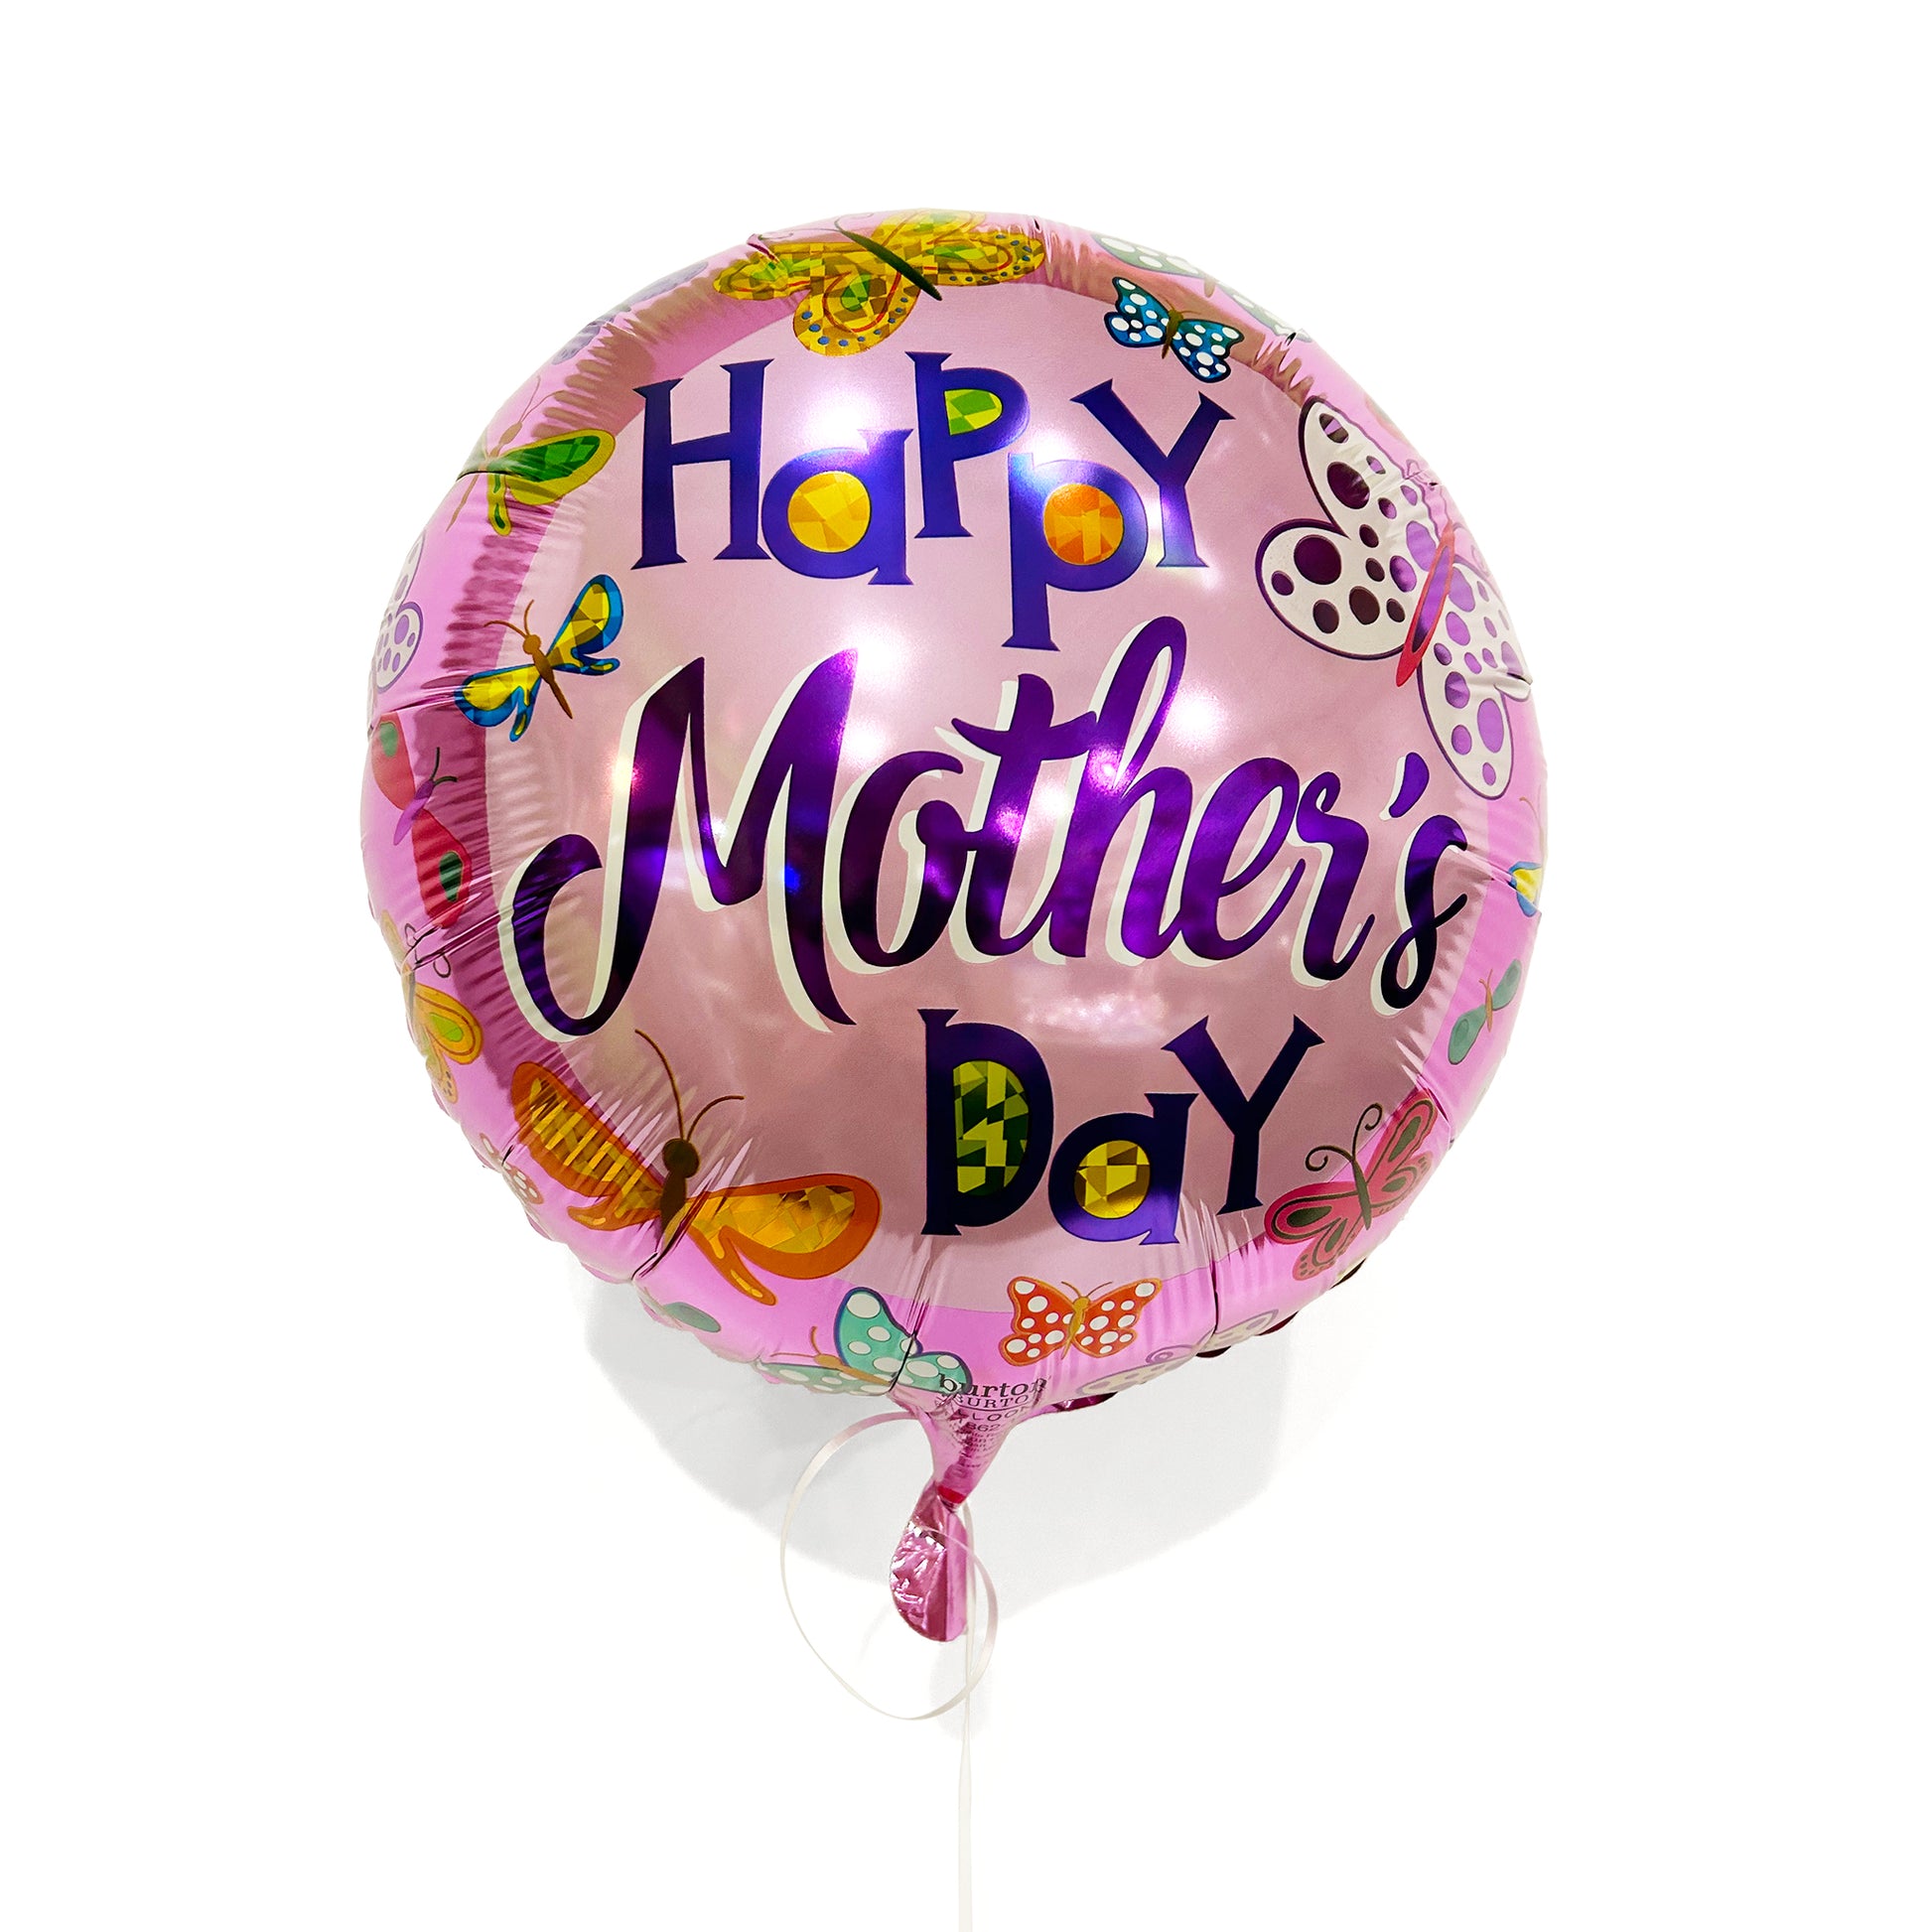 Happy mother's day pink with butterflies mylar balloon